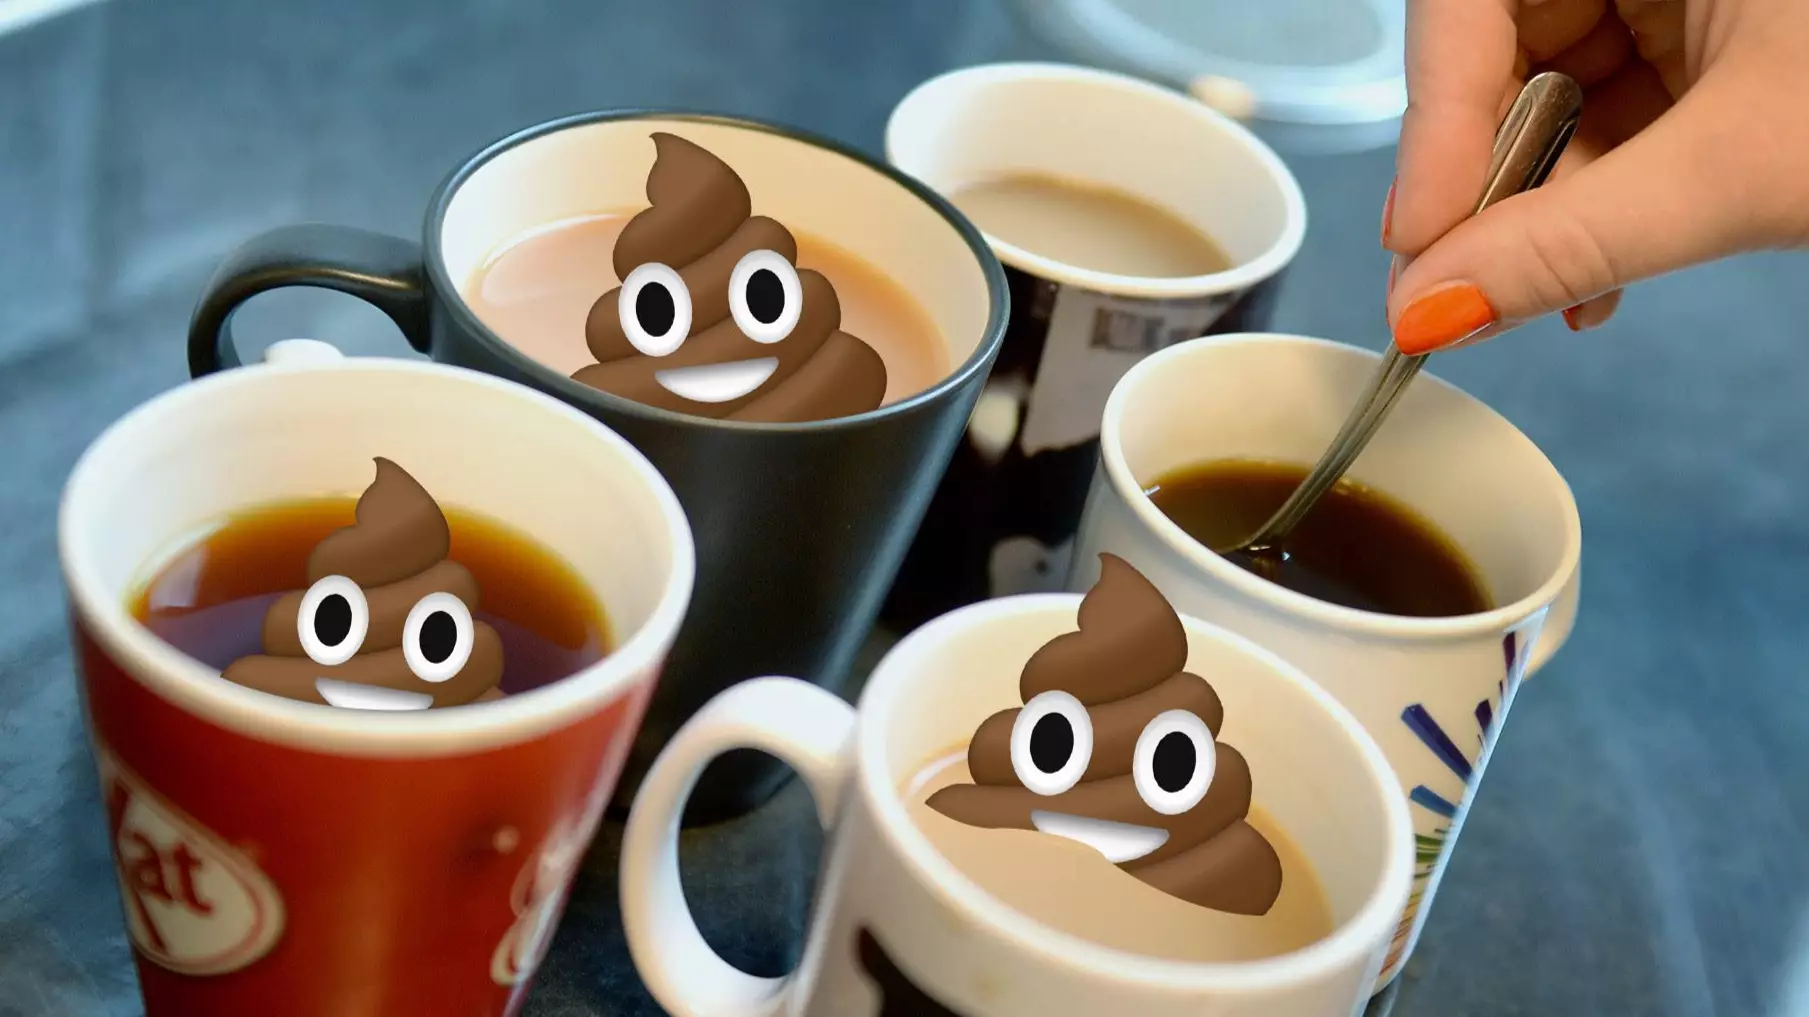 Doctor Offers Hygiene Tips As One In Five Office Mugs Found To Contain Poo